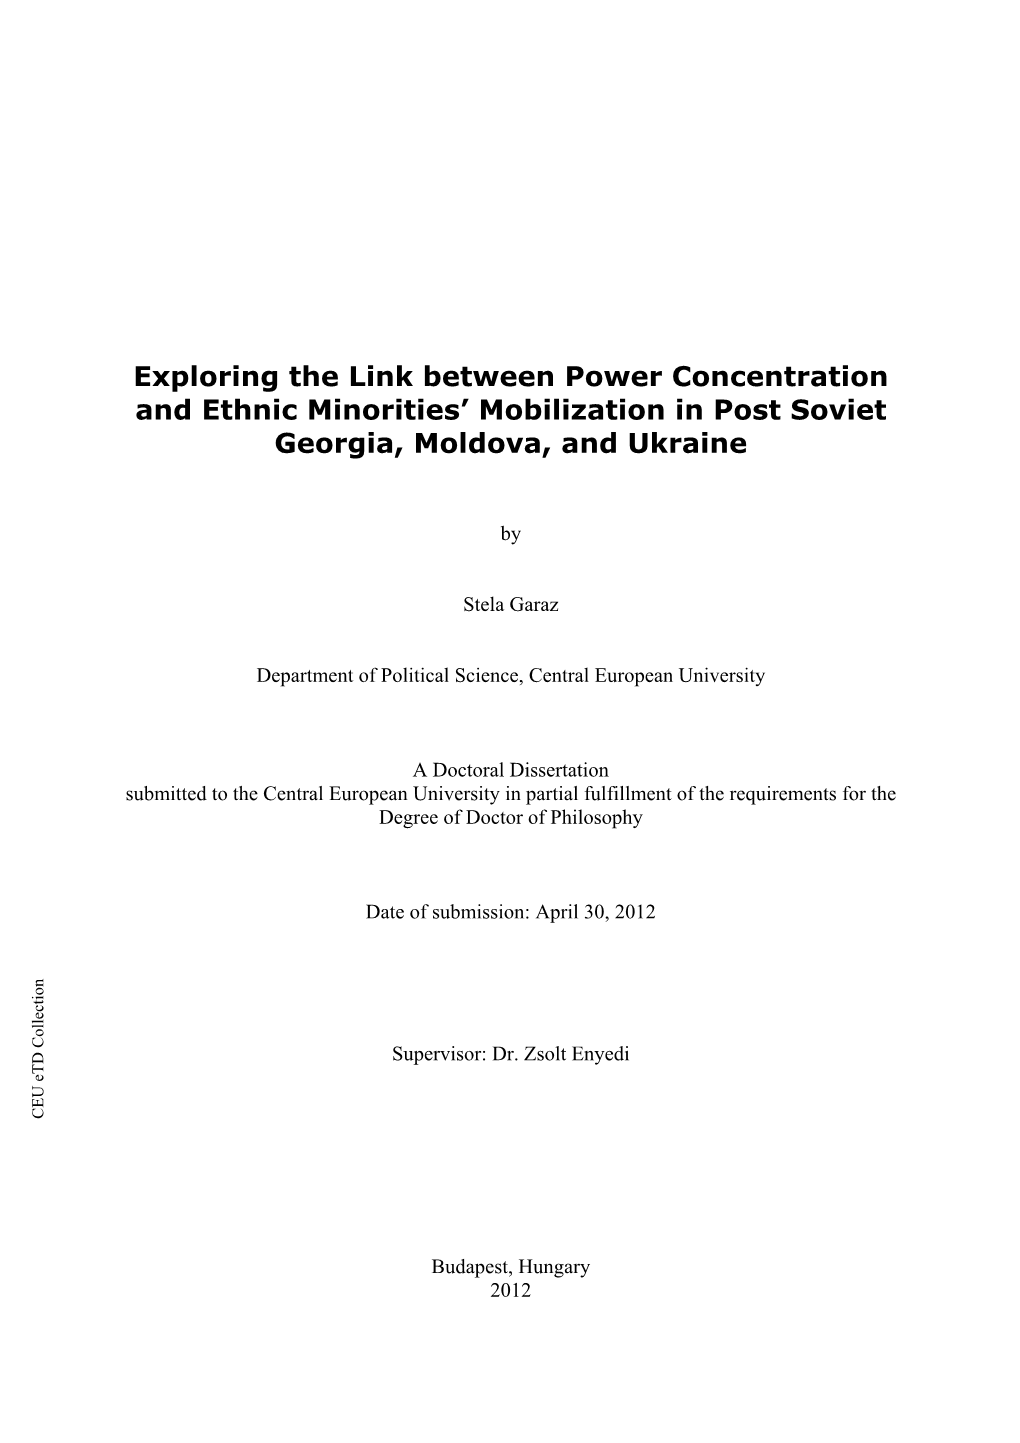 Exploring the Link Between Power Concentration and Ethnic Minorities